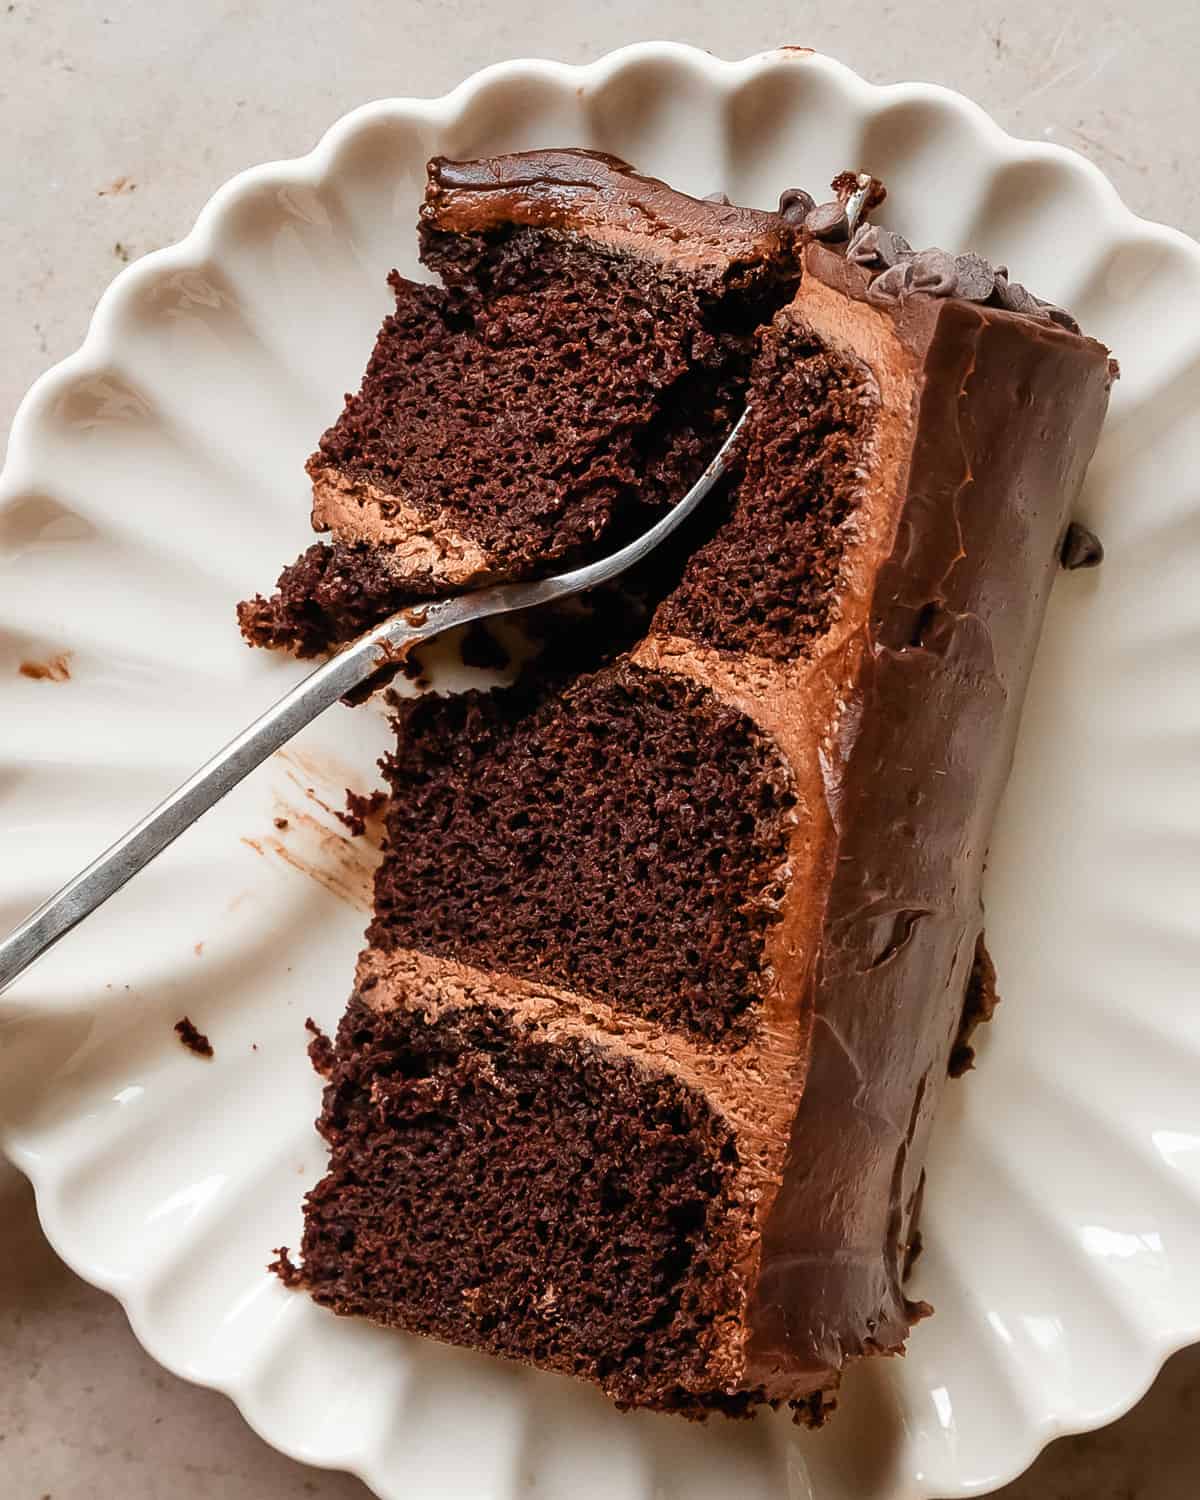 Triple Chocolate Cake is moist and fudgy three chocolate cake, layered with a rich and creamy chocolate buttercream frosting. This decadent chocolate layer cake is topped with a glossy chocolate ganache and chocolate chips. What makes this the best chocolate cake is how easily all the layers come together to make a truly remarkable triple chocolate fudge cake.